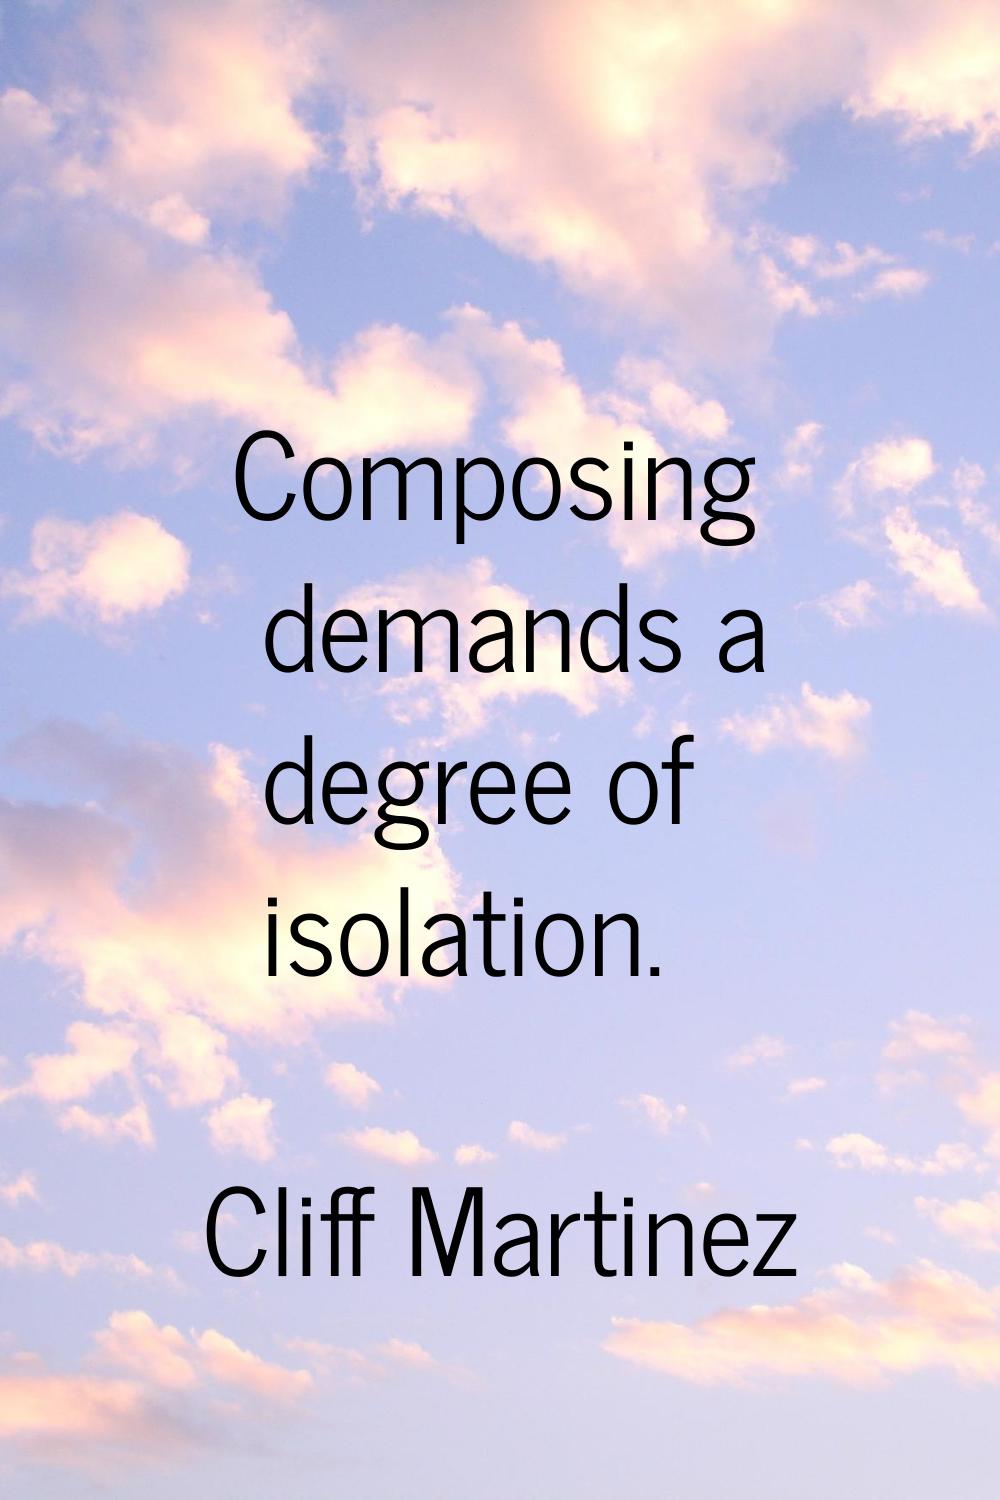 Composing demands a degree of isolation.